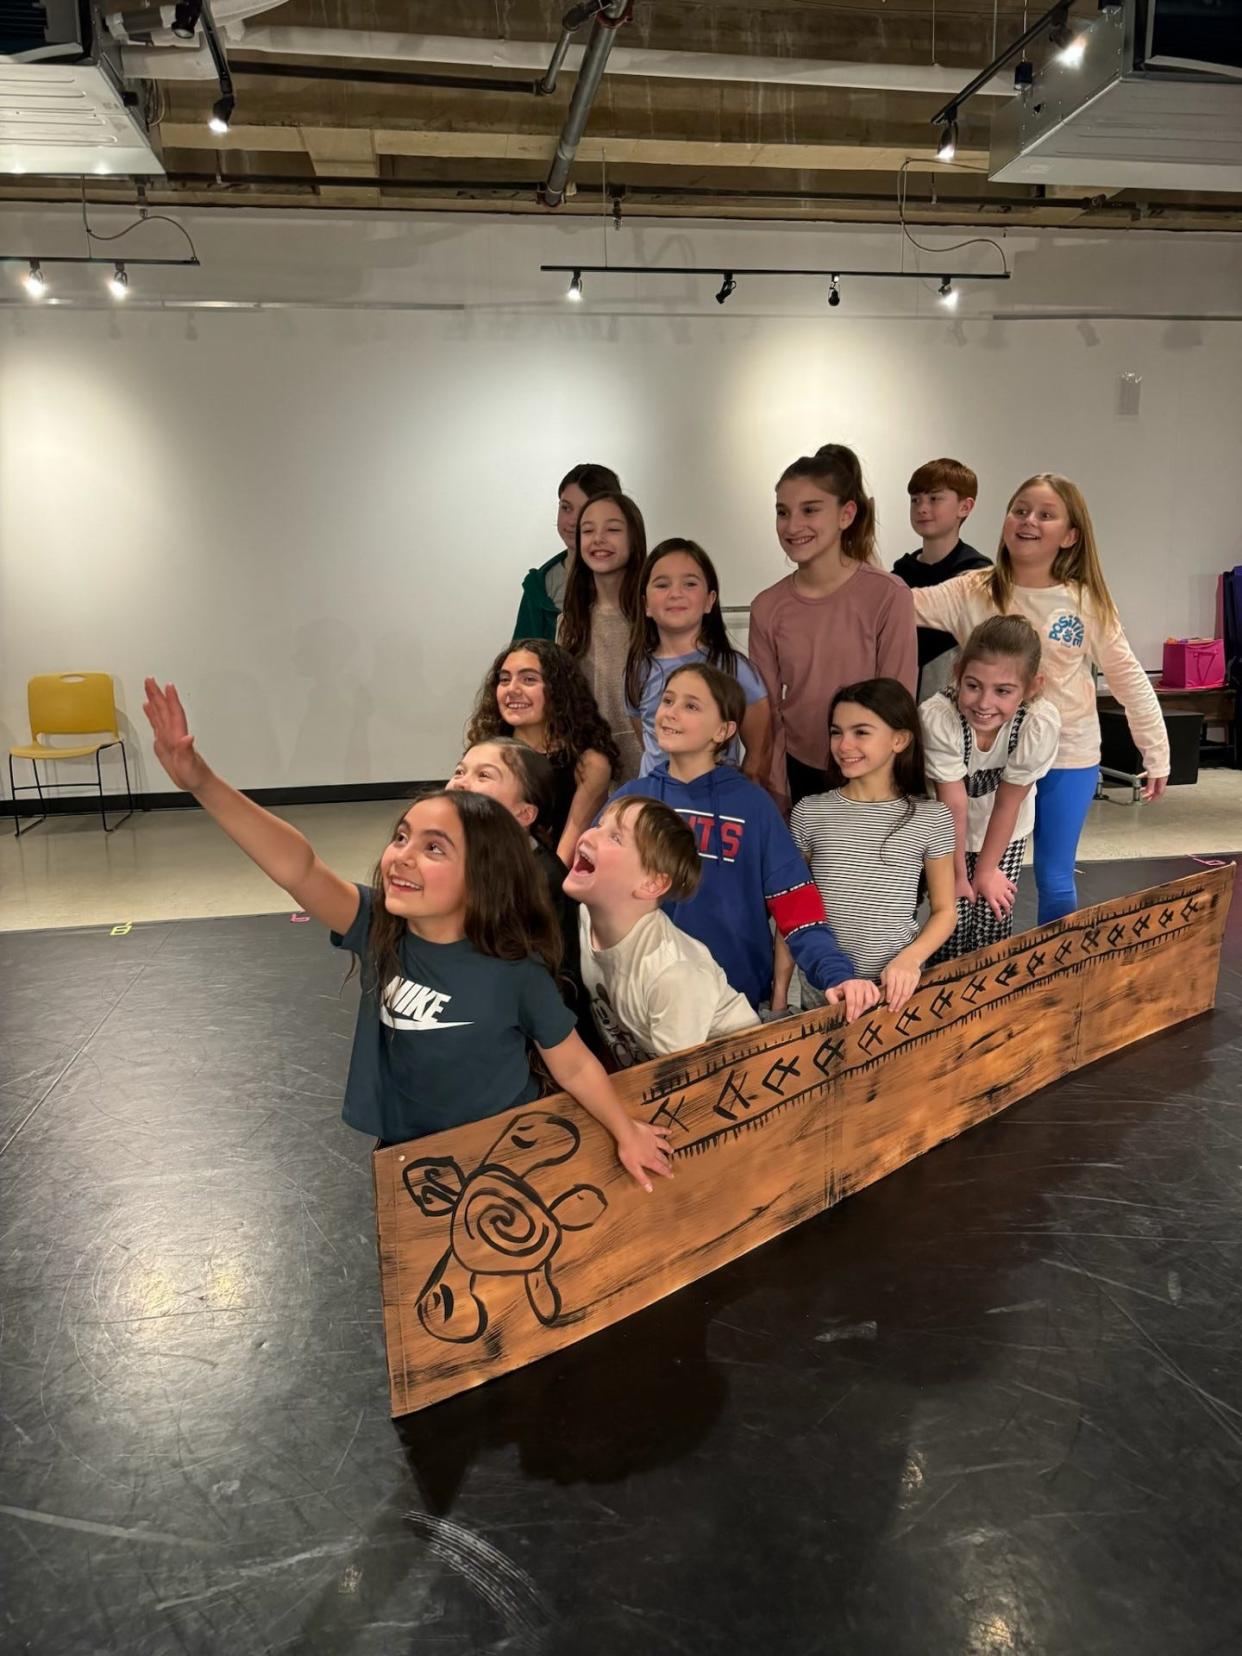 The Axelrod Performing Arts Academy presents "Moana Jr." at 7 p.m. Saturday and 2 p.m. Sunday at the Axelrod Performing Arts Center in Deal Park.